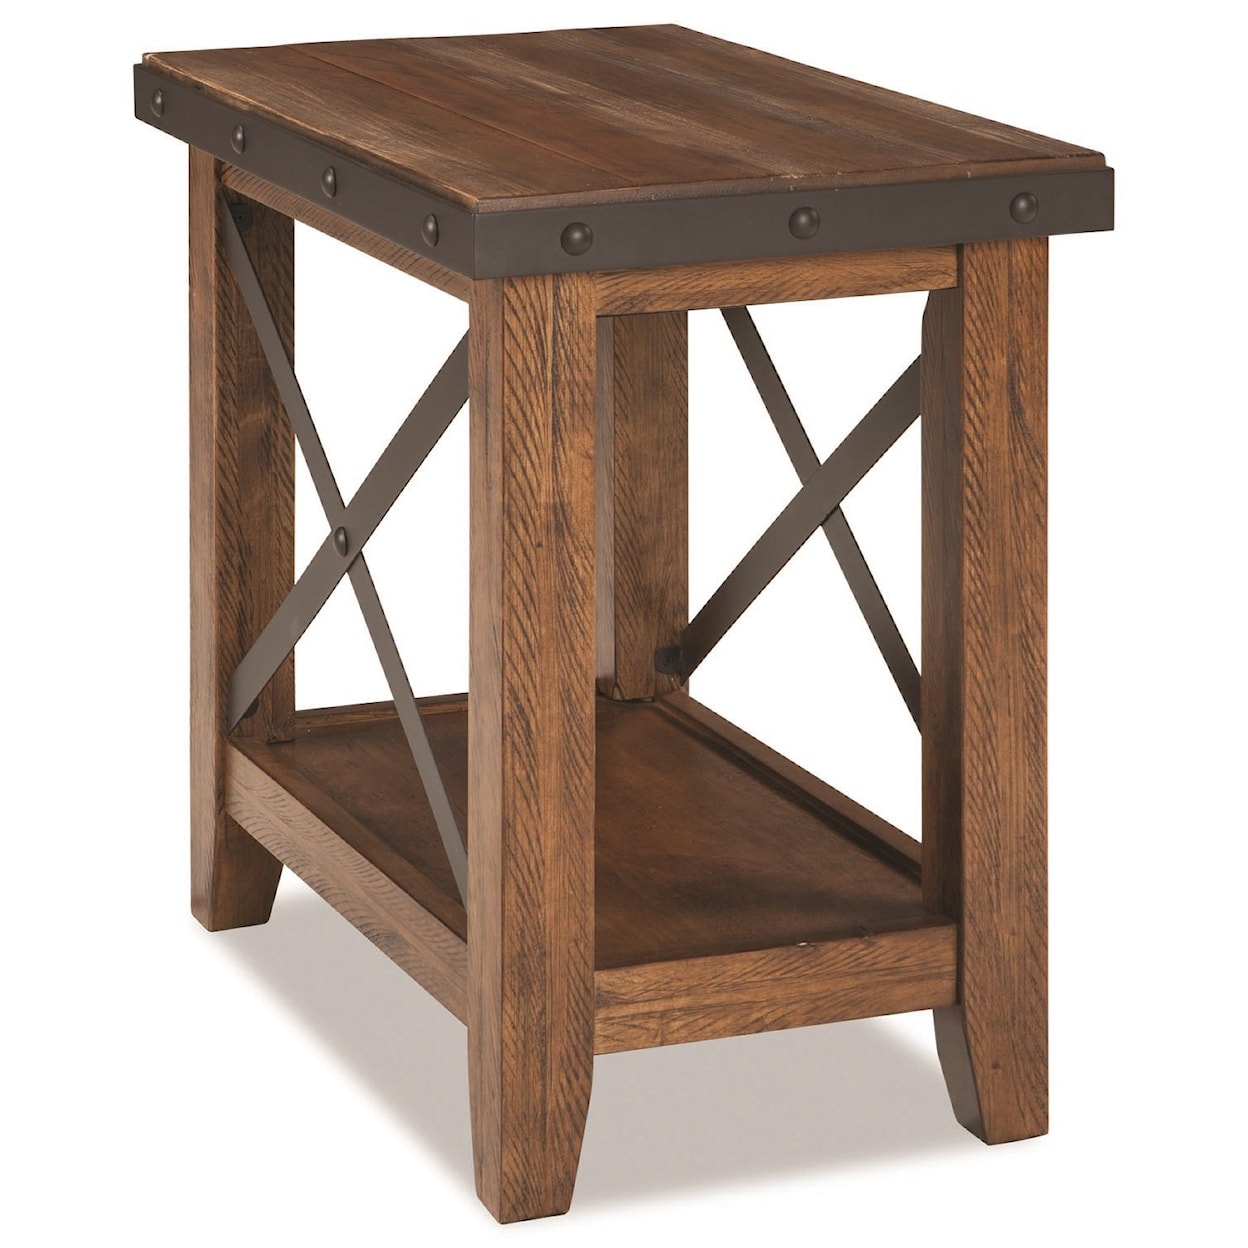 Intercon Taos Chairside Table